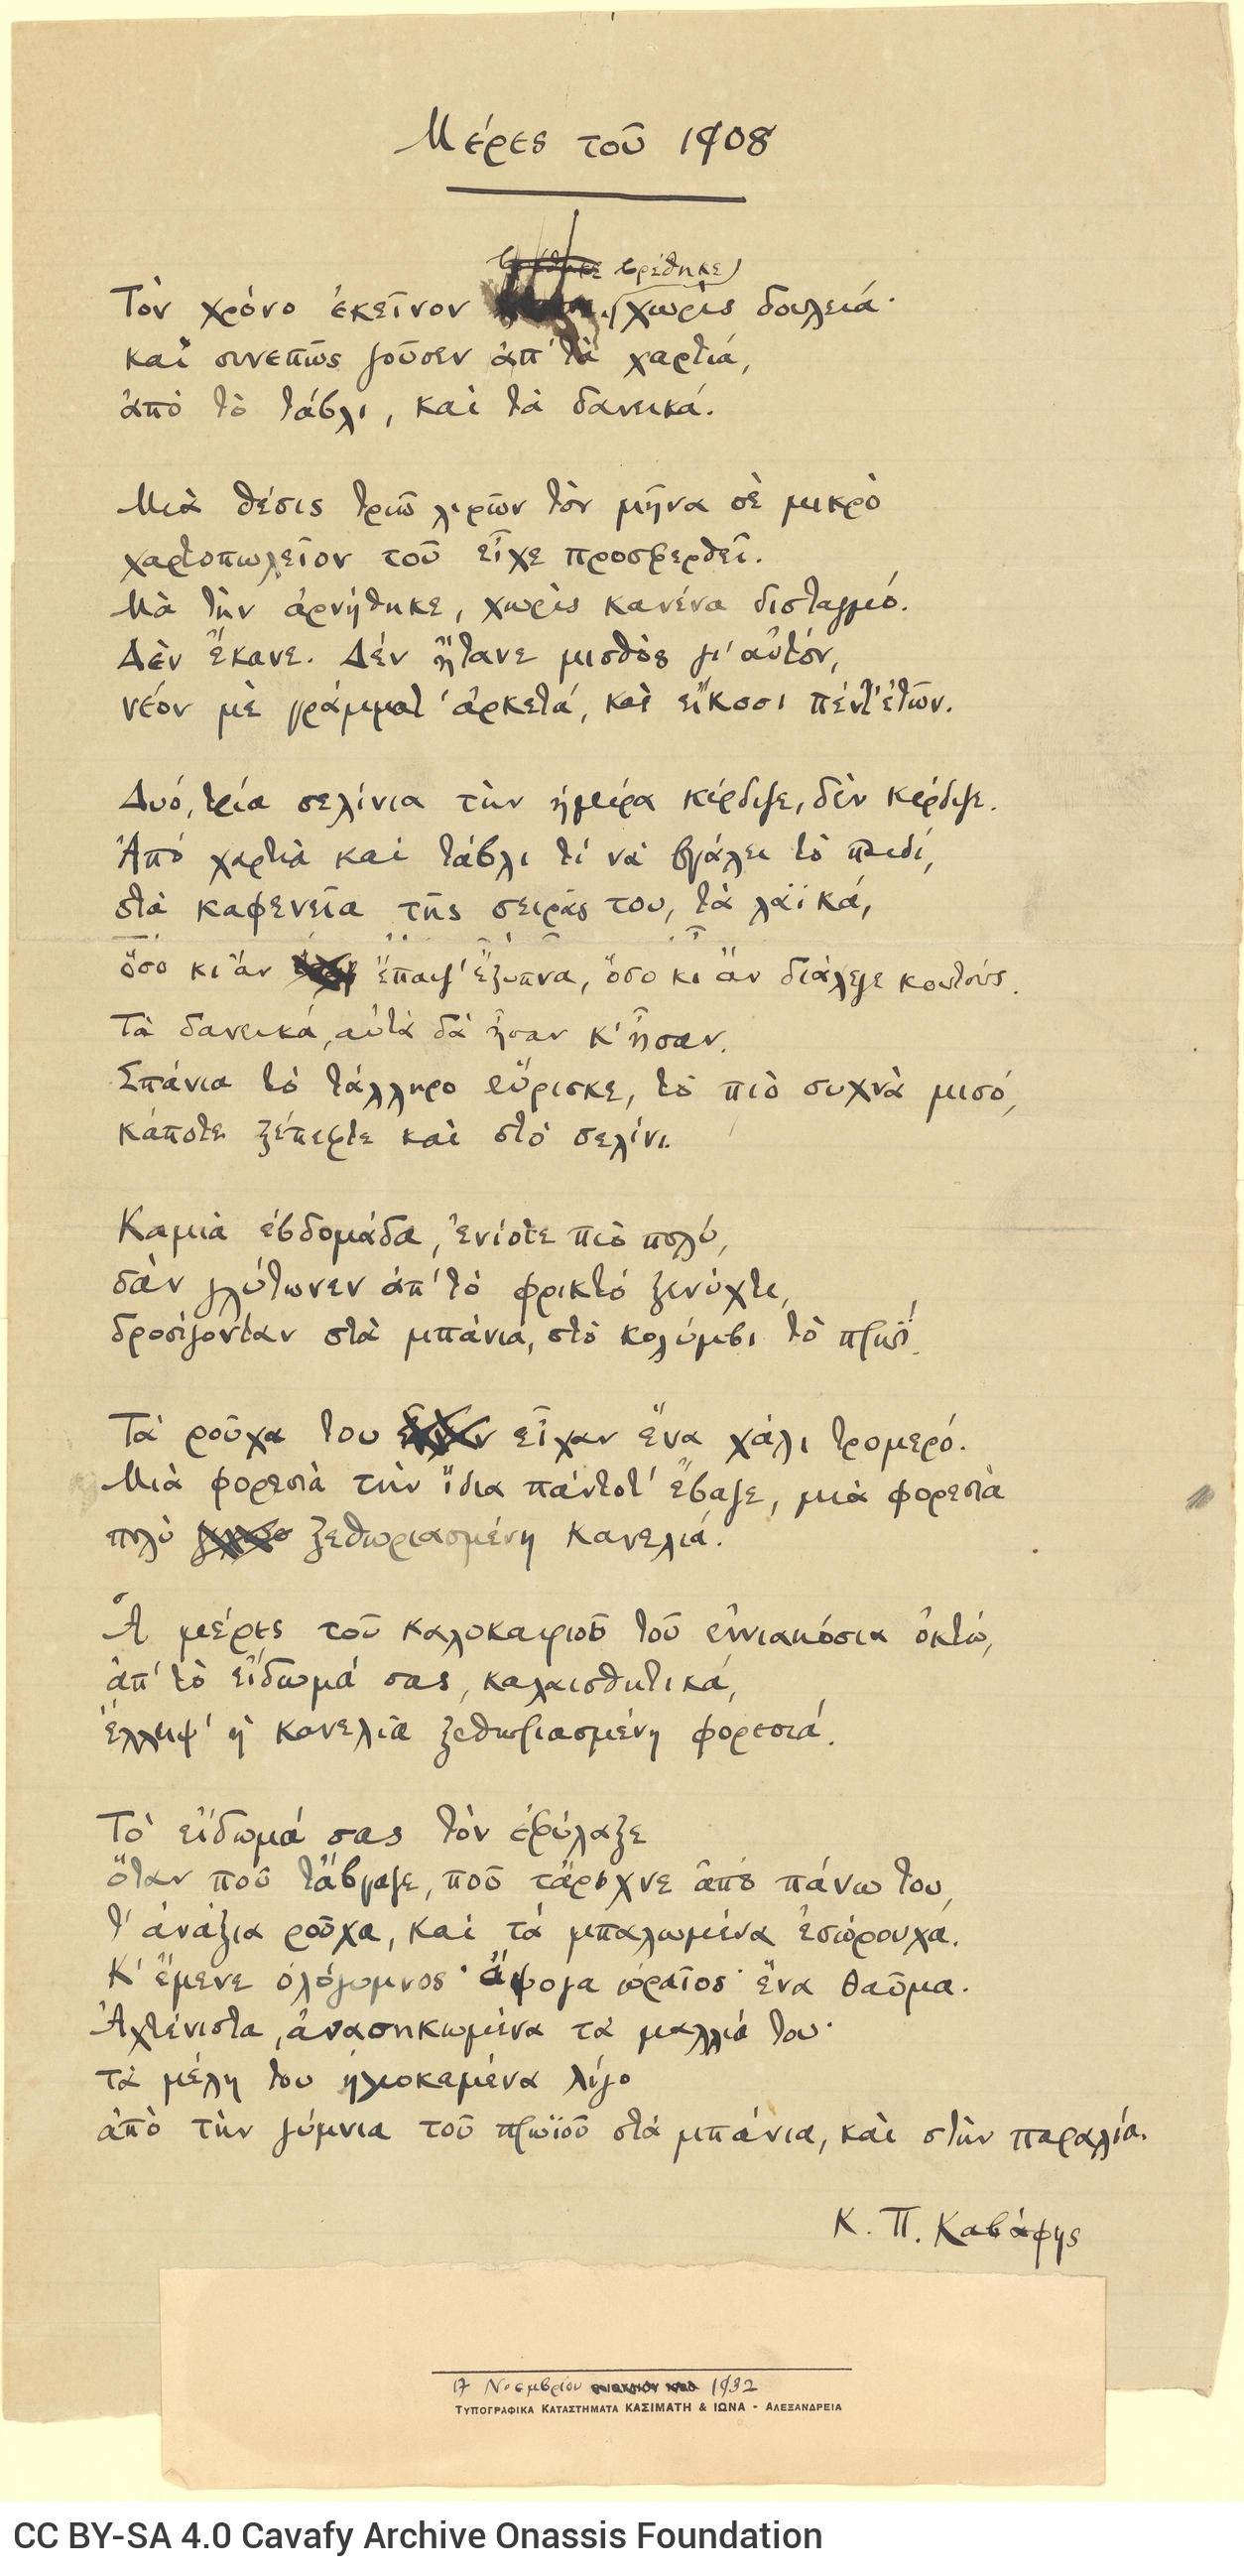 Autograph manuscript of the poem "Days of 1908". Cancellations and emendations. At the bottom, affixed piece of paper with